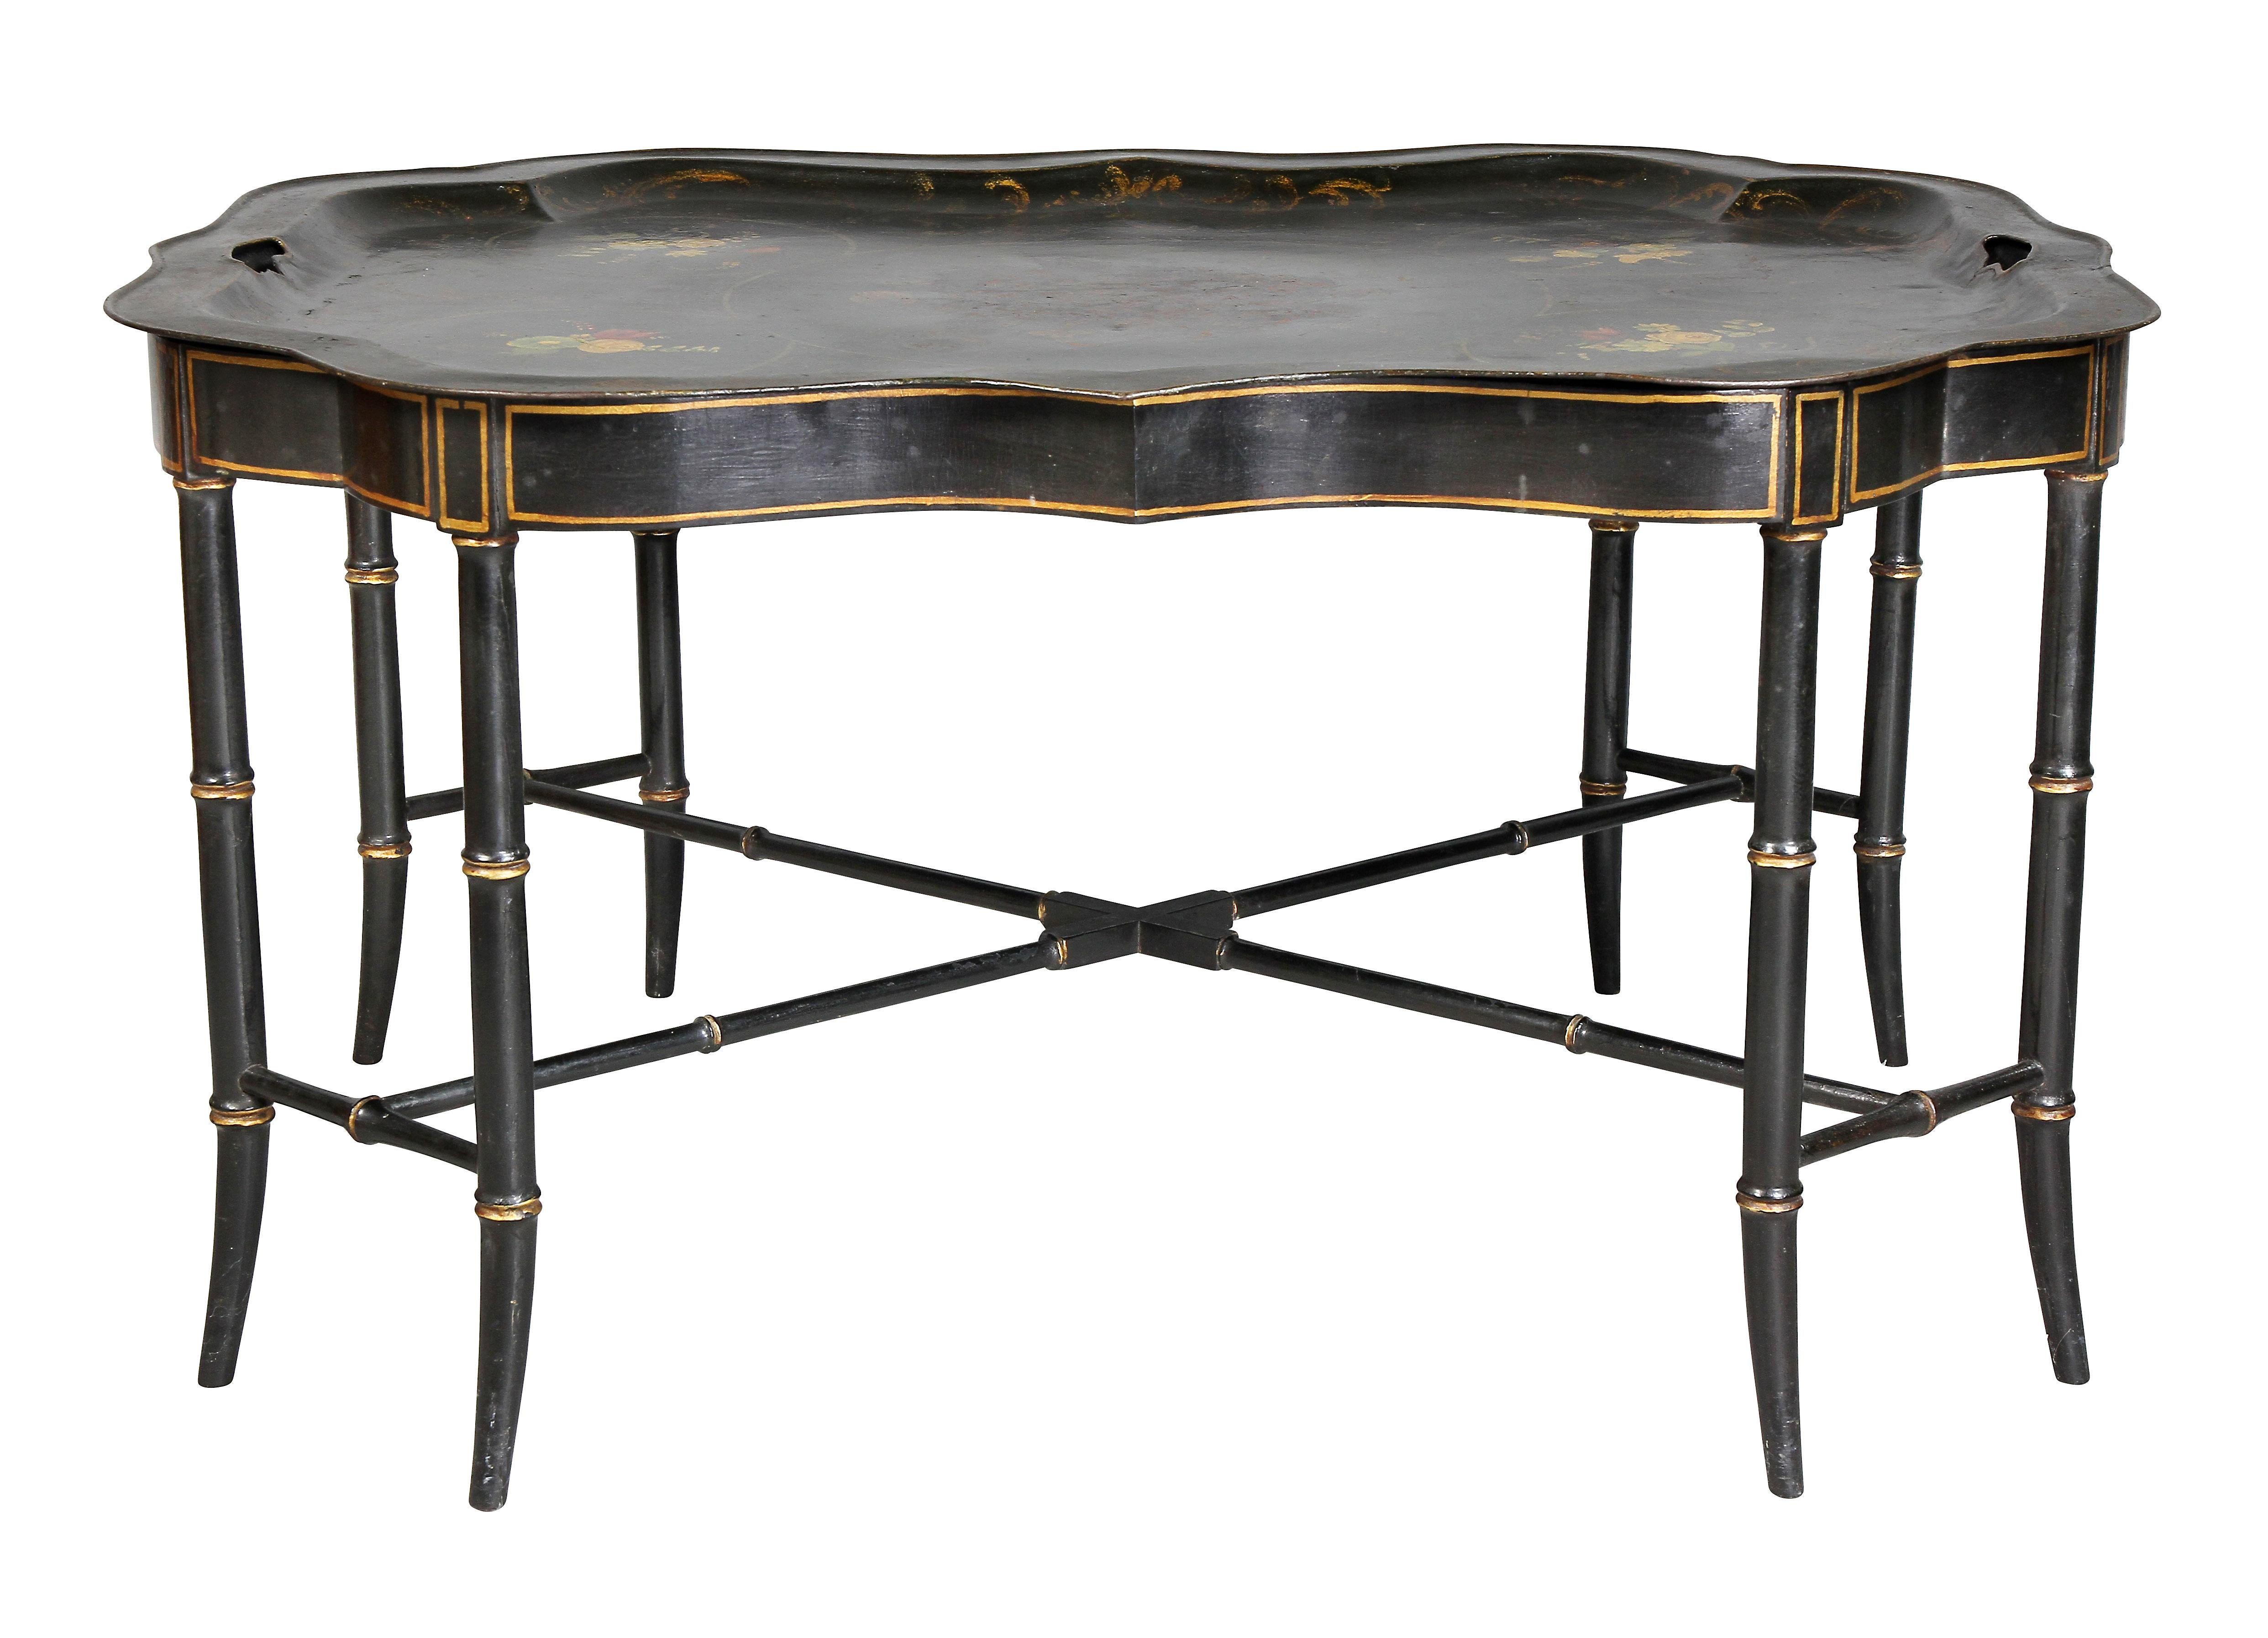 Shaped black tray with floral decoration with handles, set in a modern ebonized bamboo turned base. Provenance; John Volk Estate, Palm Beach.